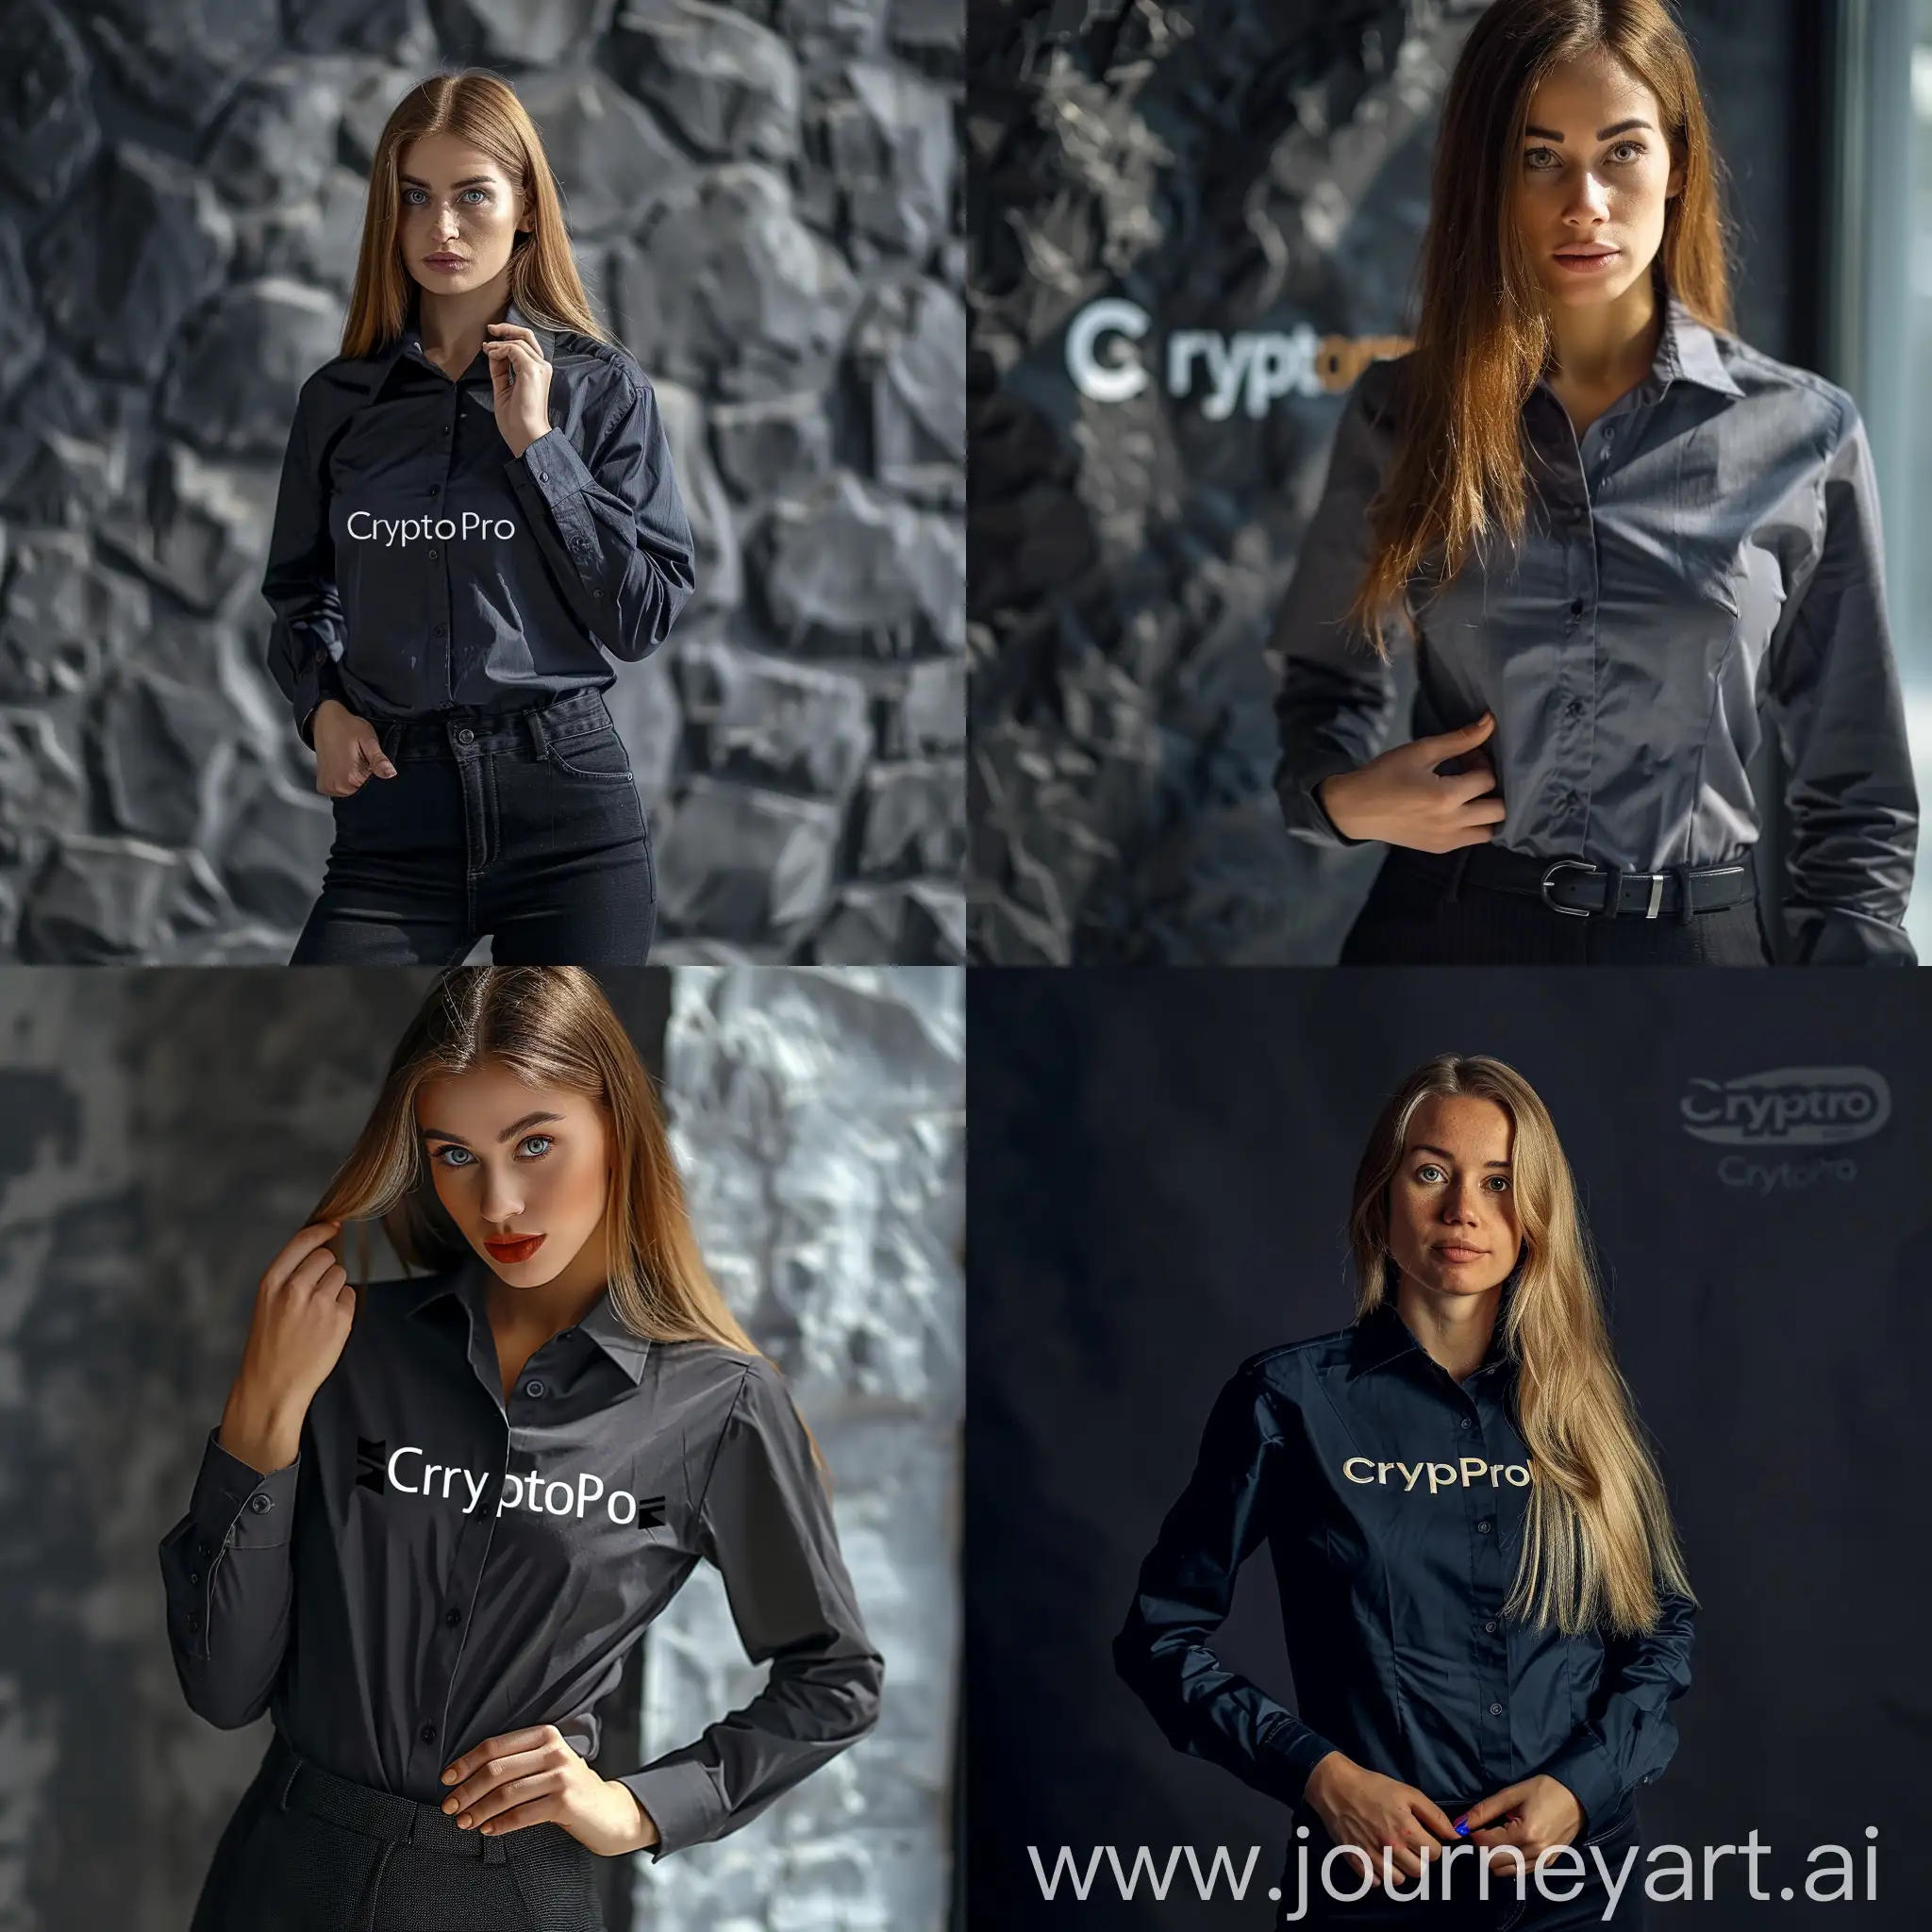 woman in a business shirt with the inscription “CryptoPro”